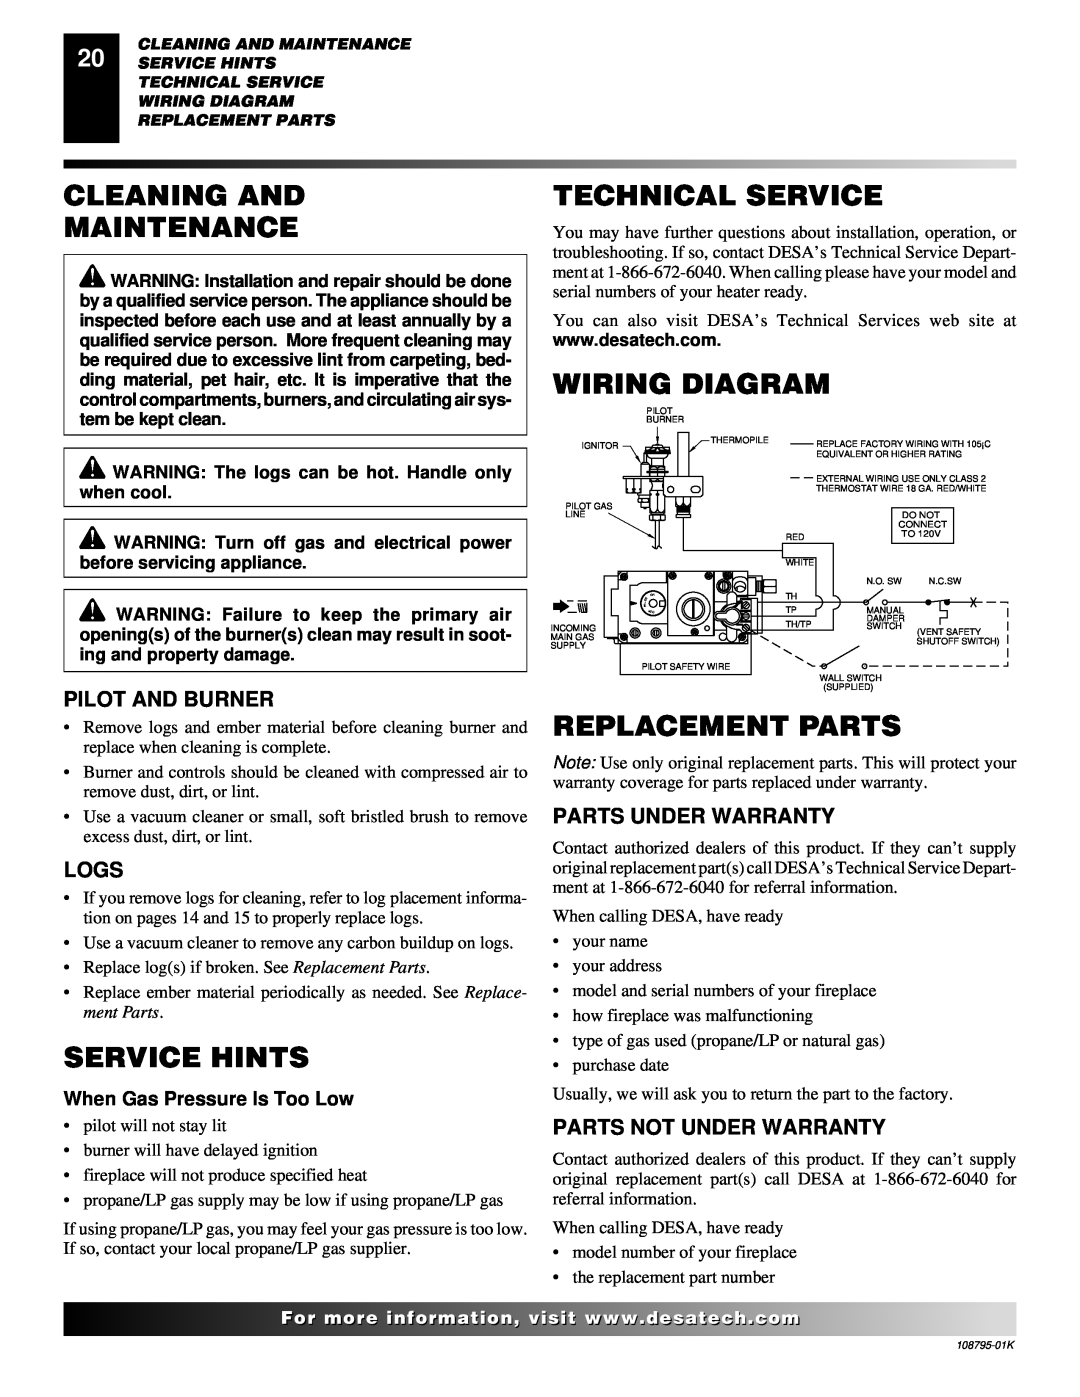 Desa AND VM42 Cleaning And Maintenance, Technical Service, Wiring Diagram, Service Hints, Replacement Parts 